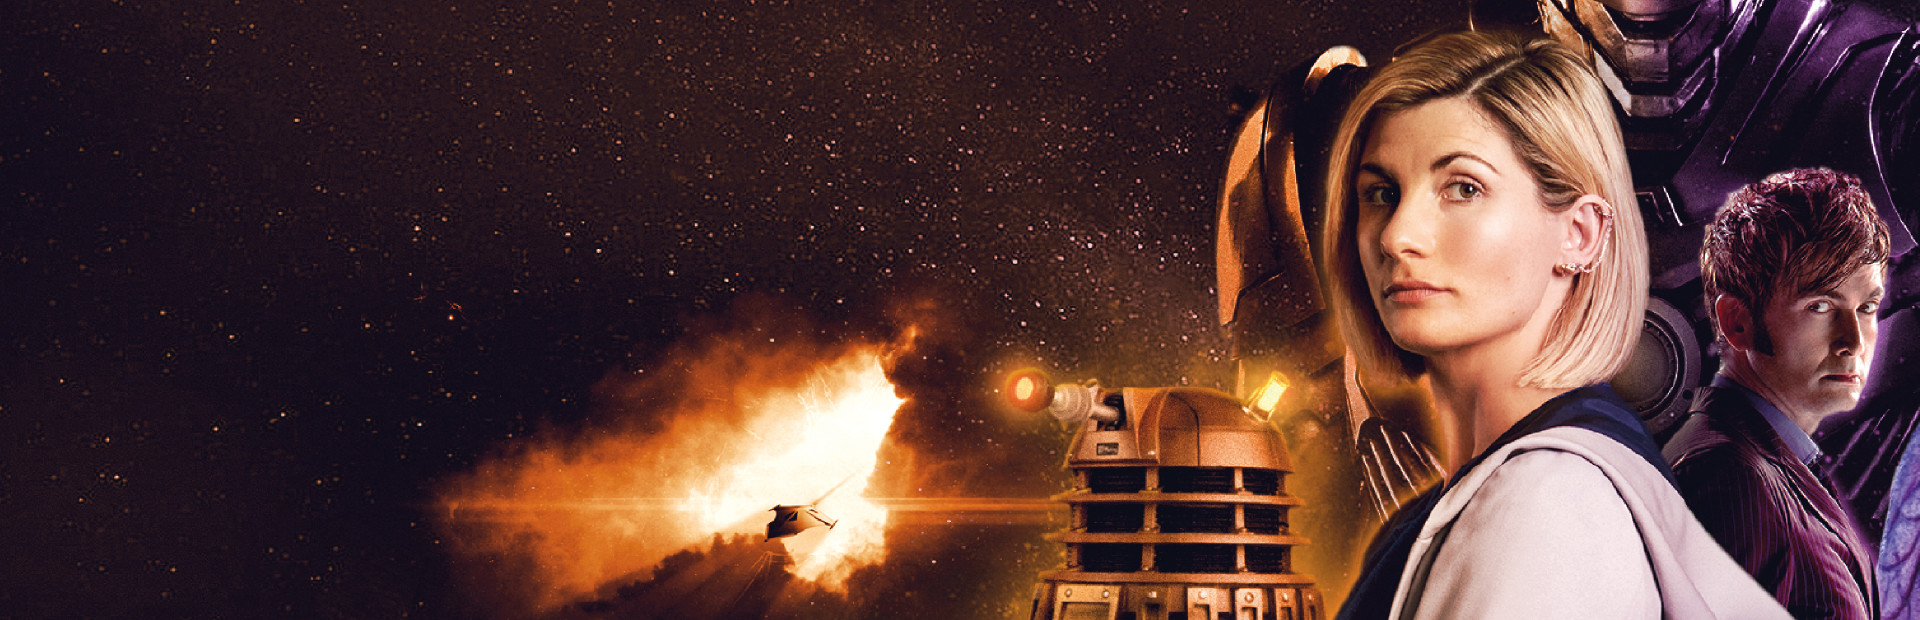 Doctor Who: The Edge of Reality cover image